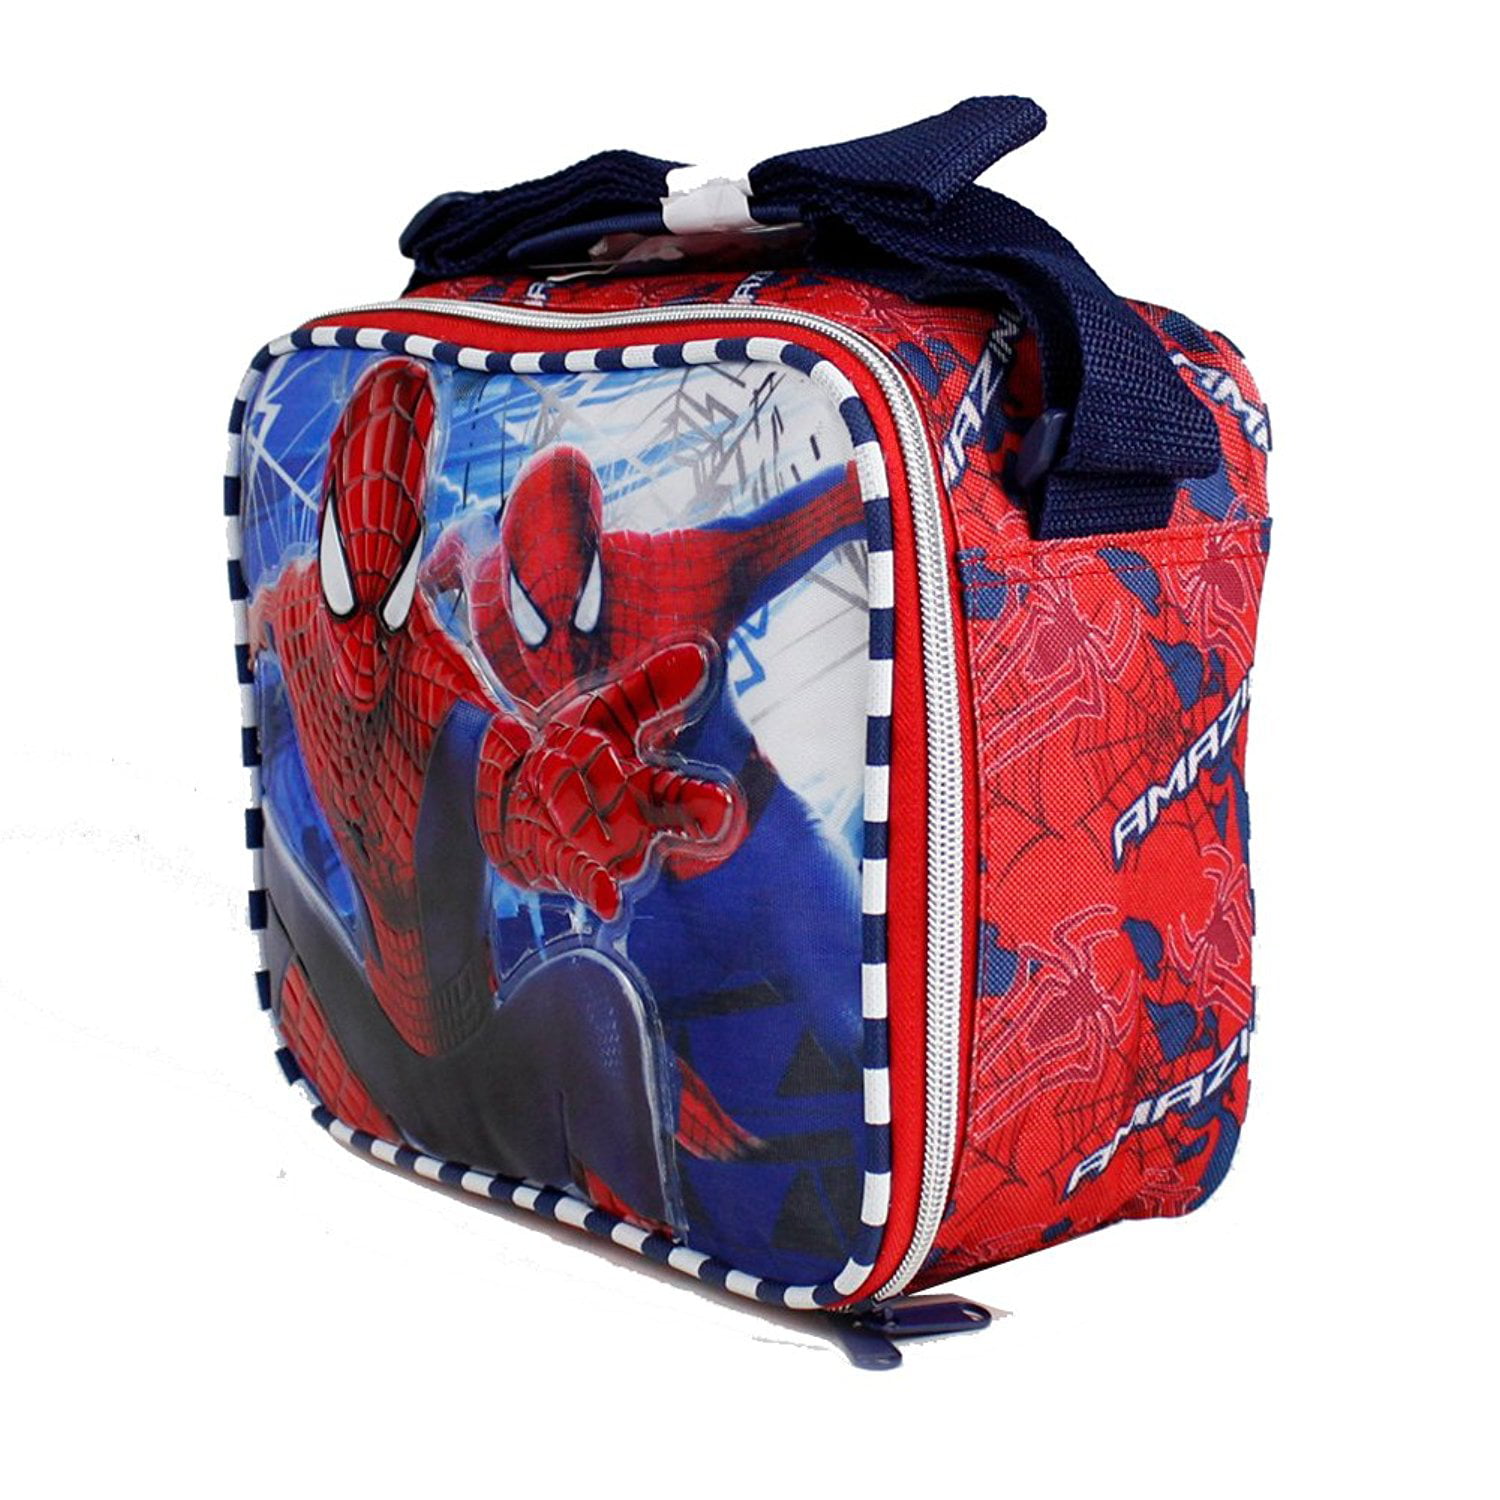 MARVEL AMAZING SPIDERMAN ULTIMATE SCHOOL SANDWICH LUNCH BAG INSULATED TOTE BOYS 